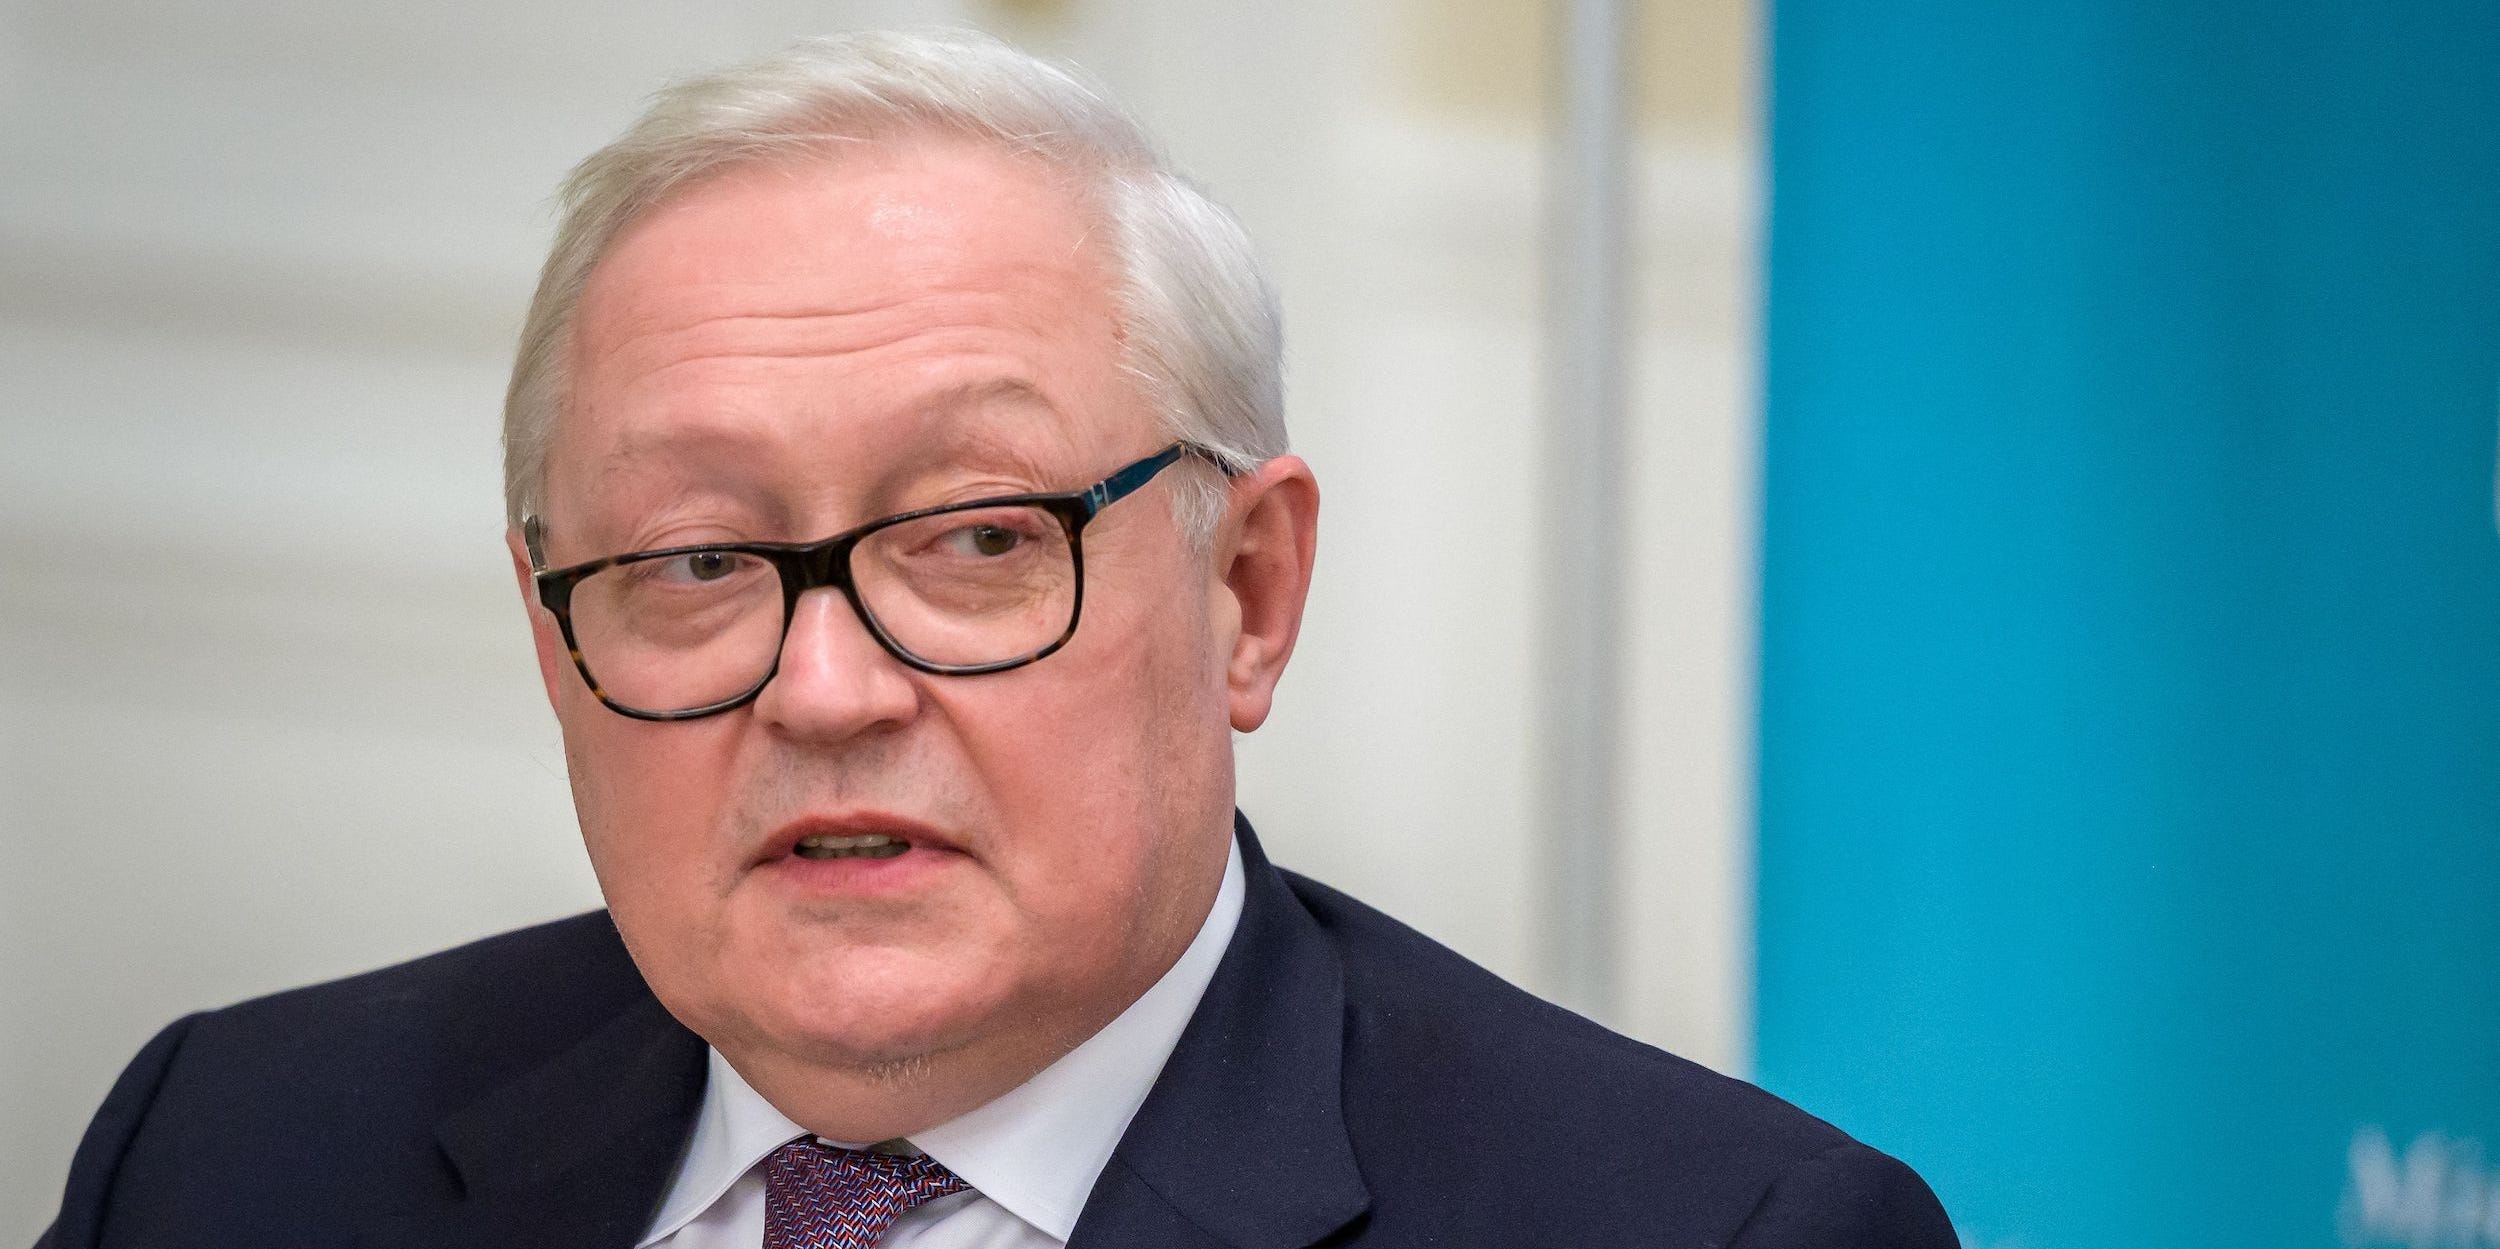 Deputy Foreign Minister Sergei Ryabkov looks on during a press conference following talks with US counterpart on soaring tensions over Ukraine, in Geneva, on January 10, 2022.